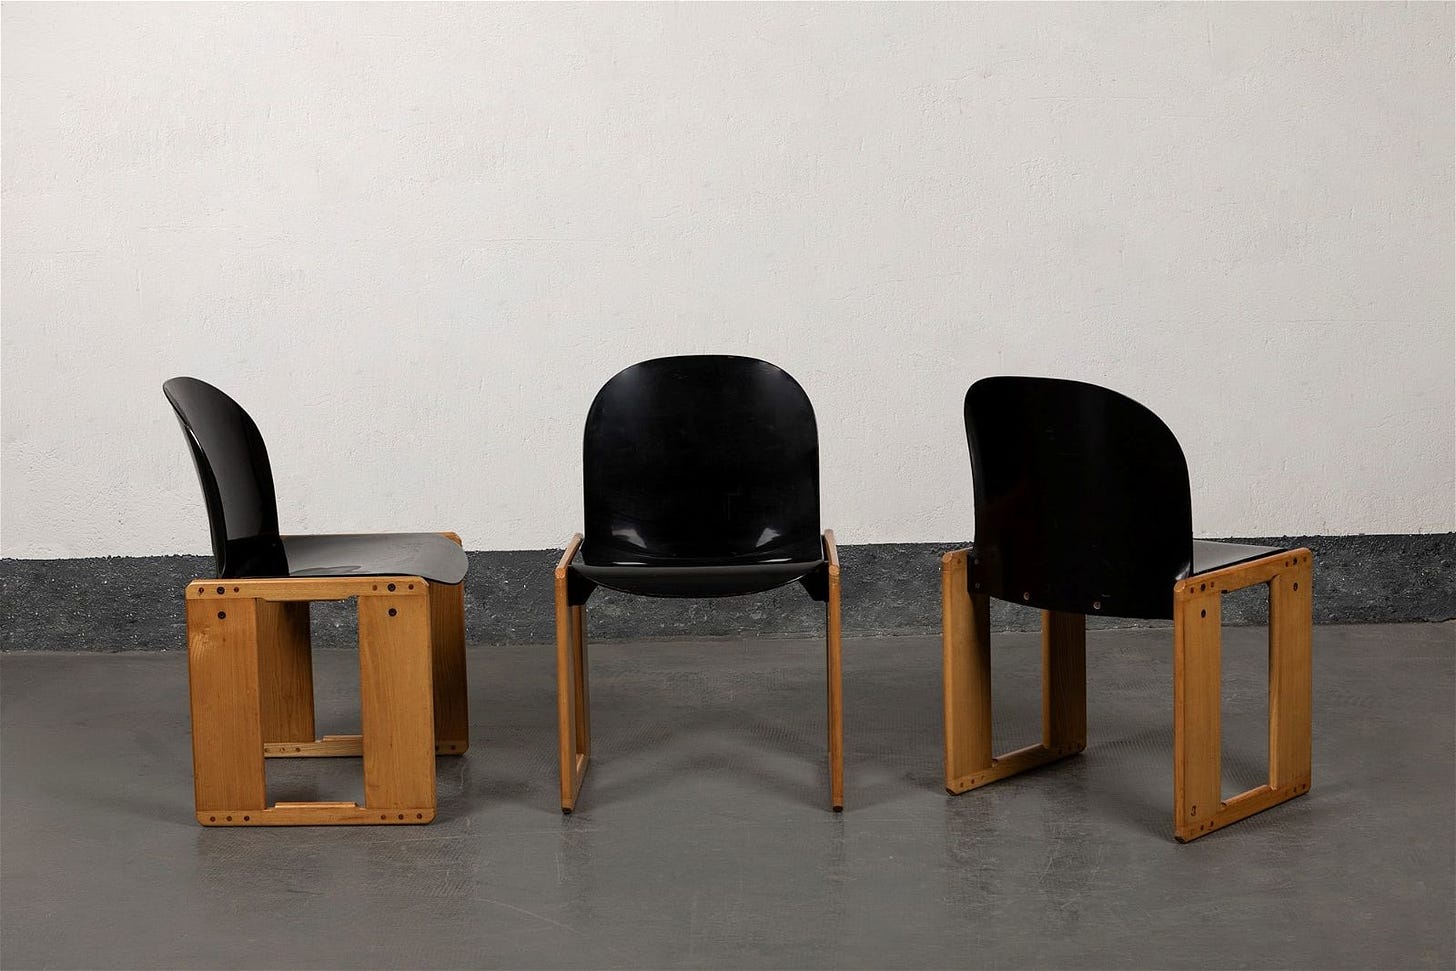 Afra and Tobia Scarpa - Three chairs, 1974